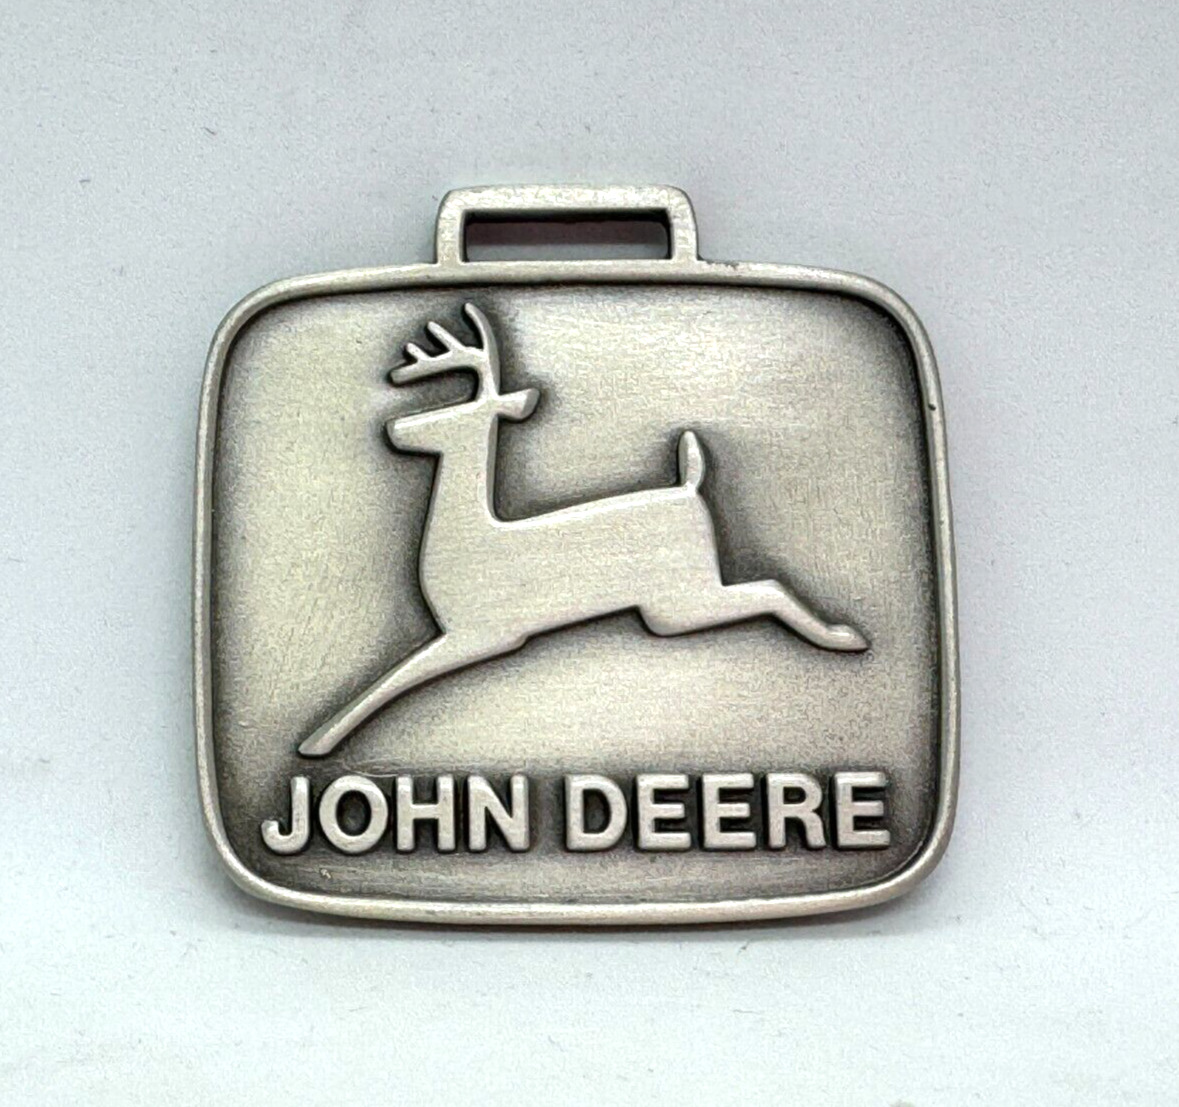 1968 John Deere Logo Watch Fob Trademark Series Officially Licensed Product NOS